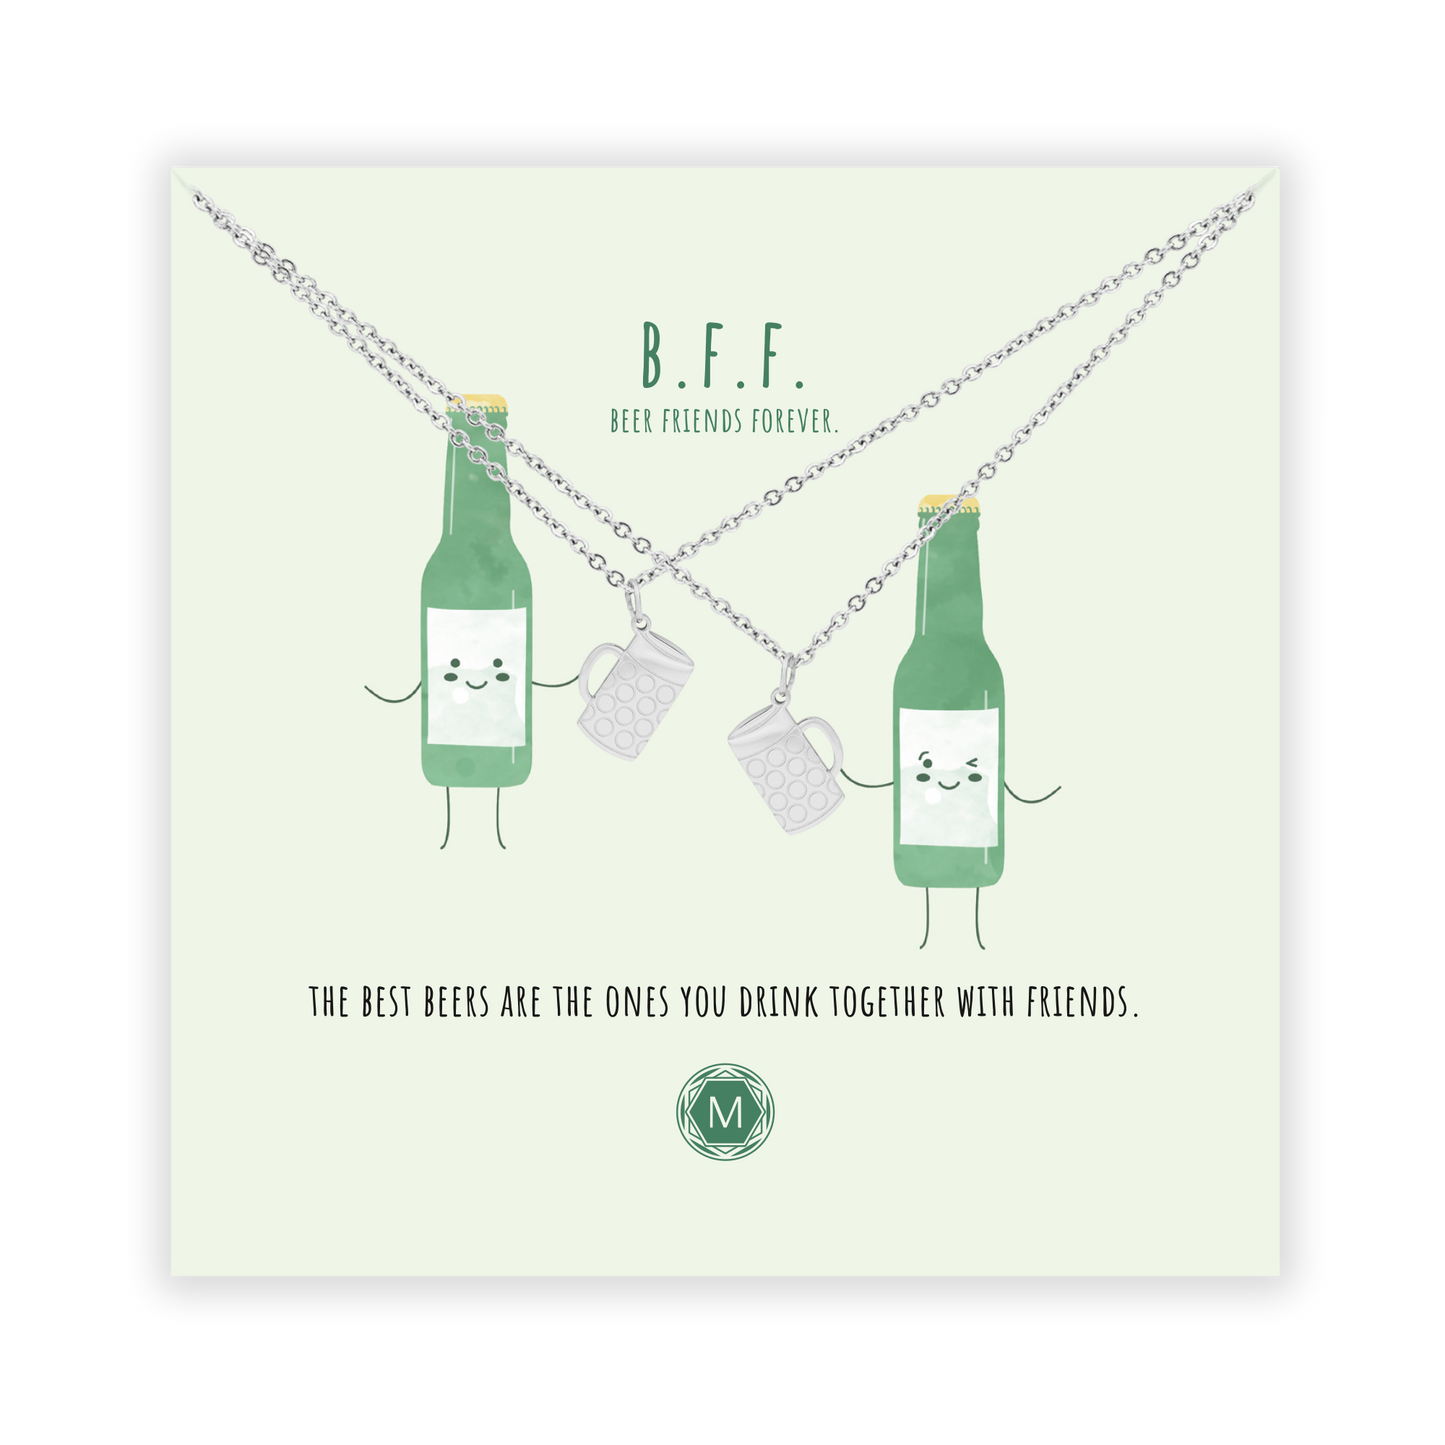 B.F.F. BEER FRIENDS FOREVER 2x Necklace